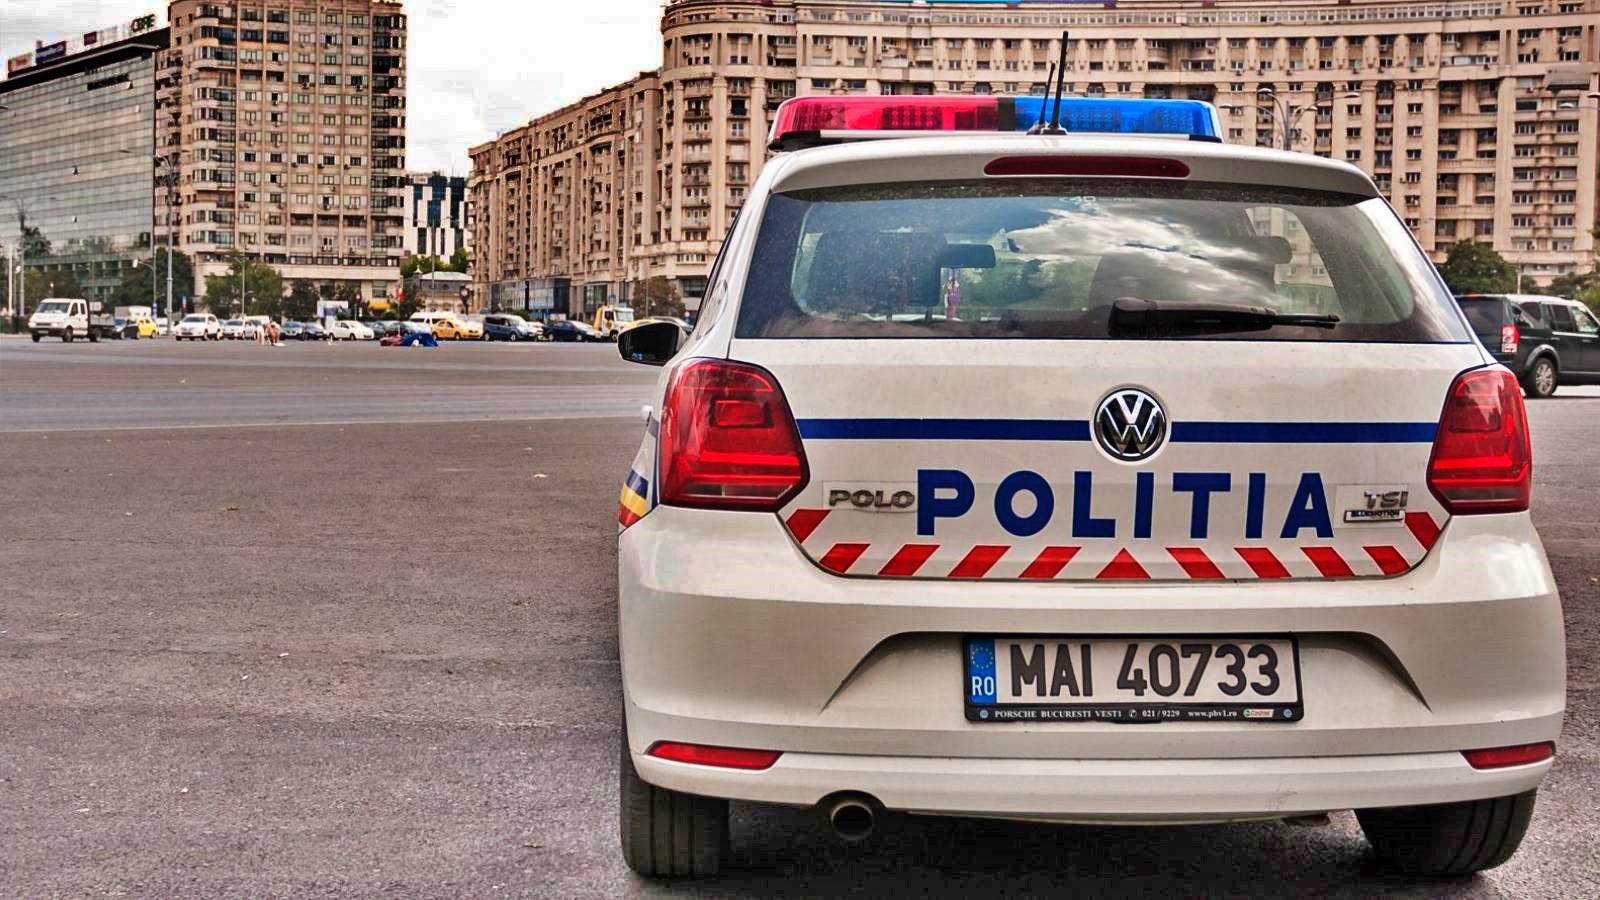 The Romanian Police fines irregular crossing of the street